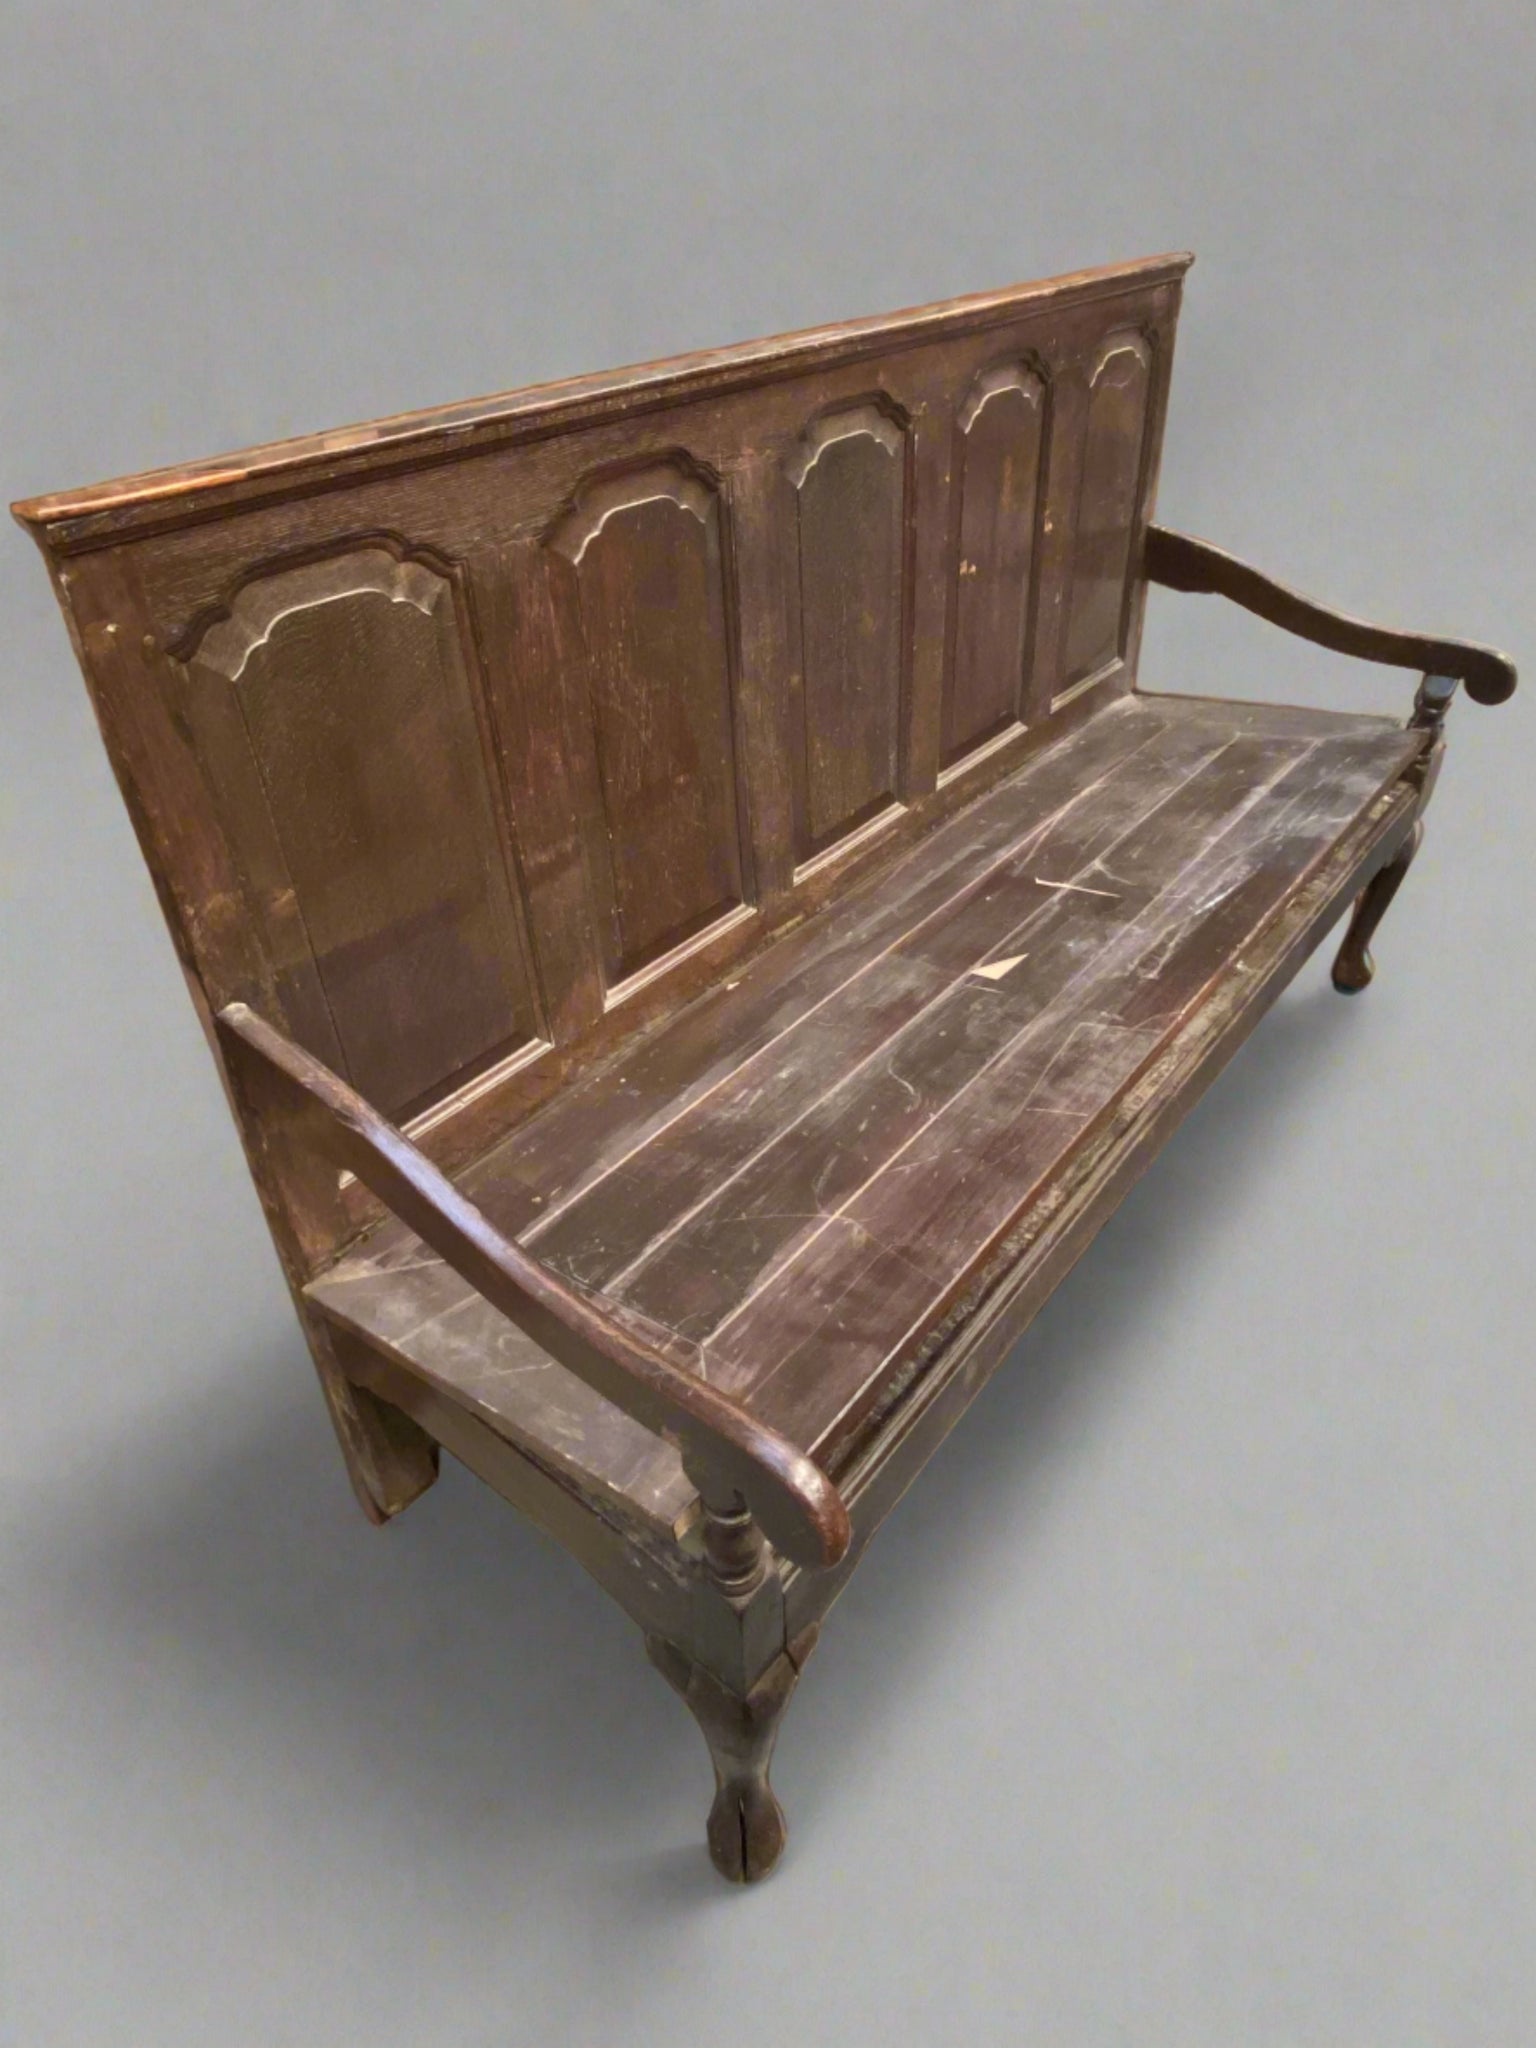 Wide dark wooden church-style bench/pew with a high back of five fielded panels.